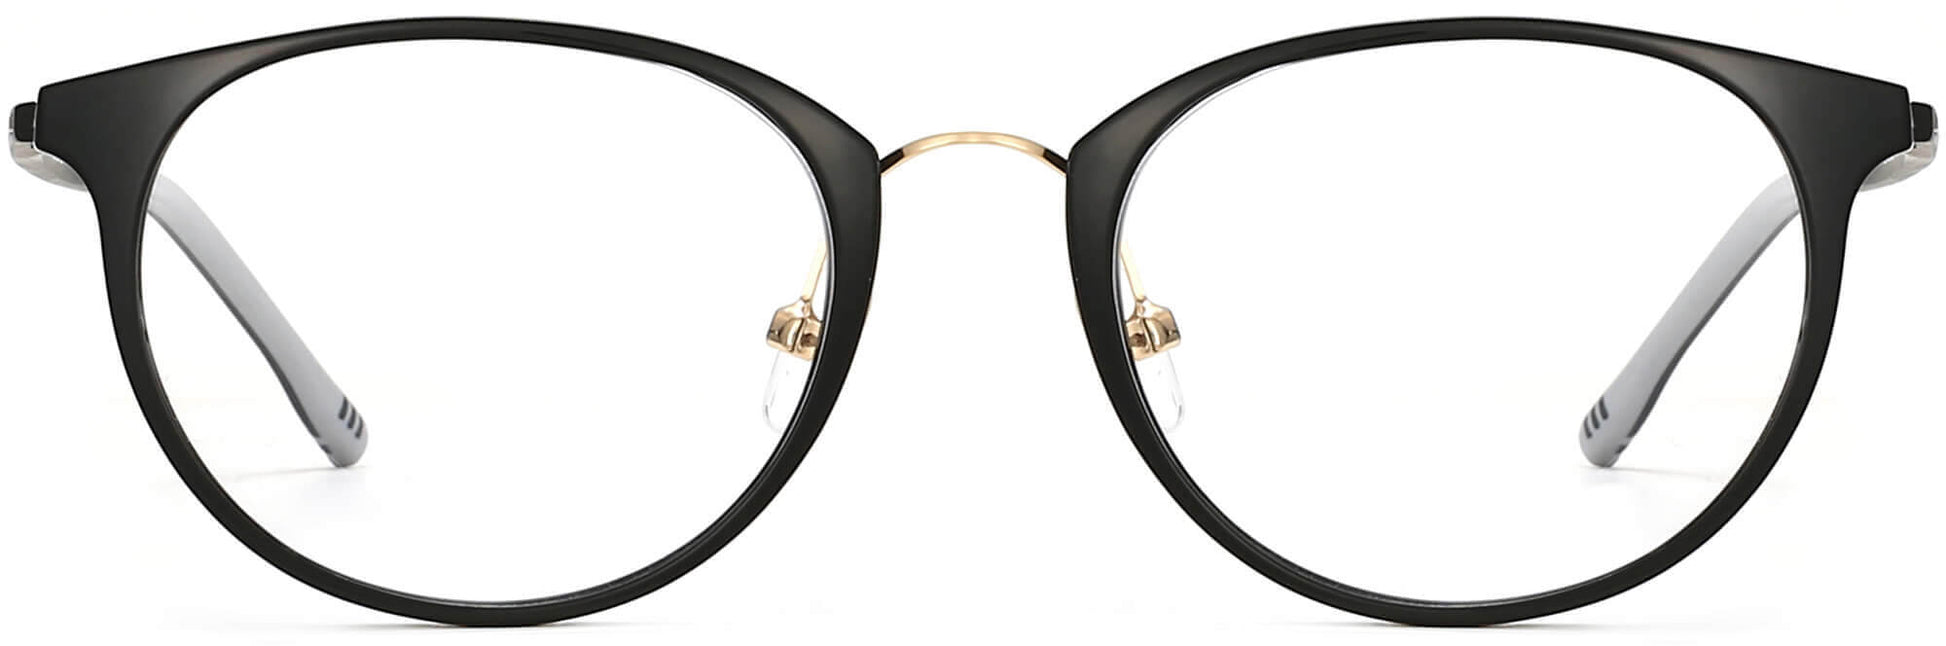 Polly Round Black Eyeglasses from ANRRI, front view